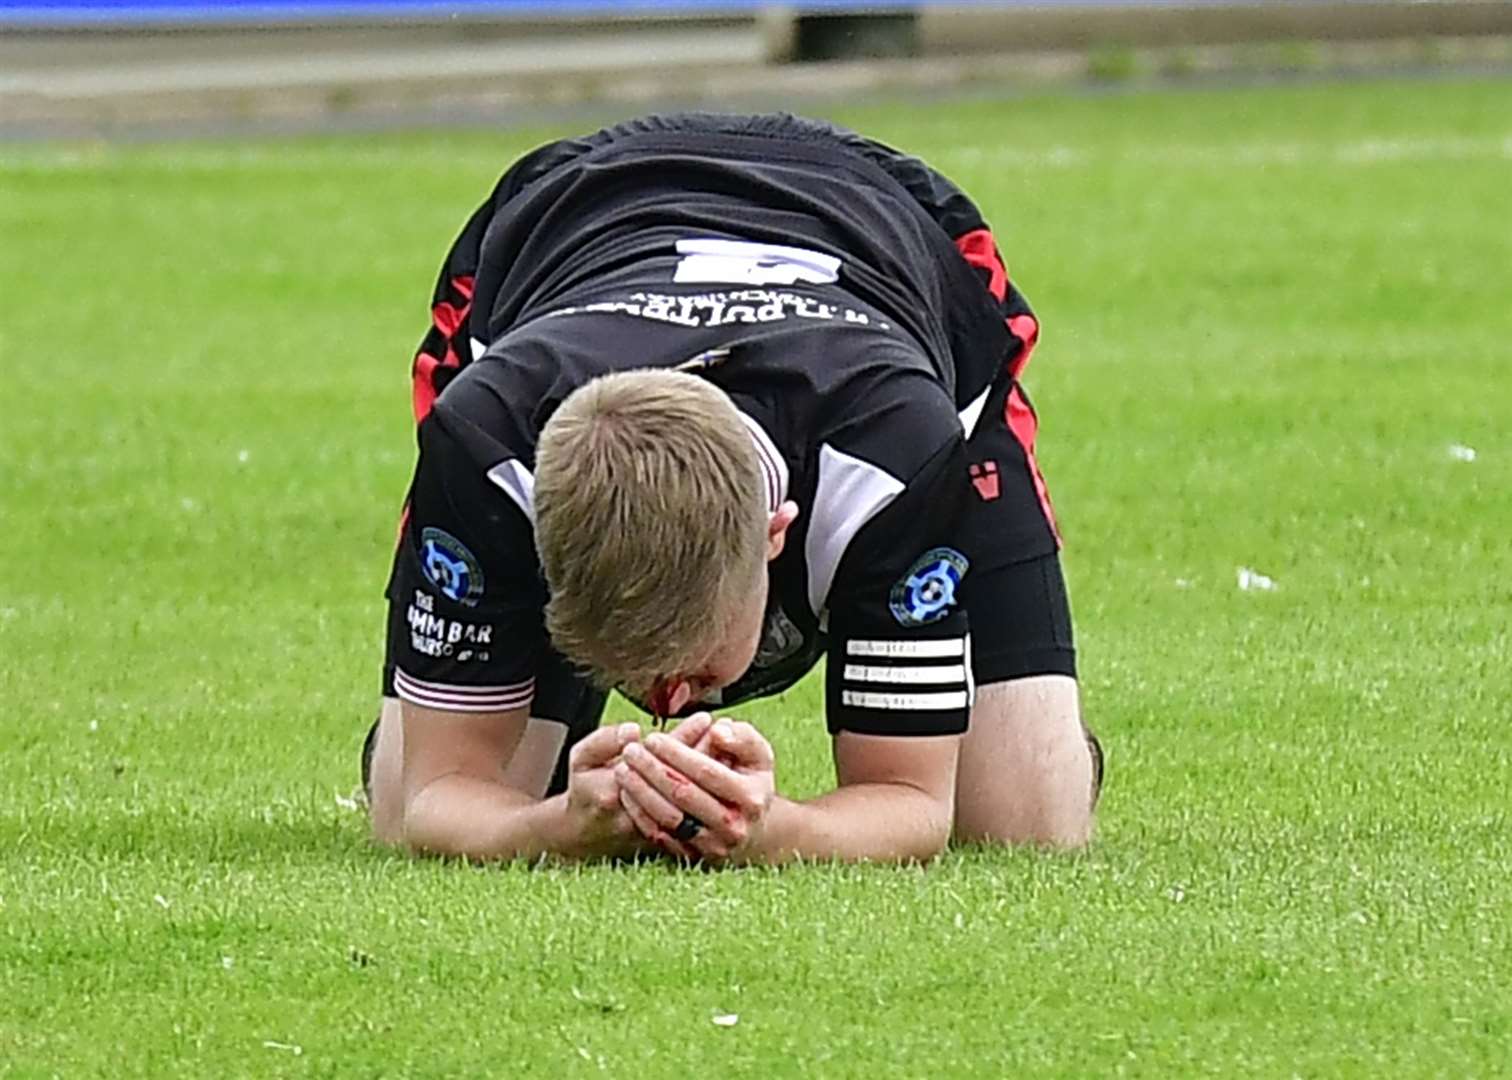 Academy captain Alan Farquhar required seven stitches after a clash of heads with Buckie's Kevin Fraser. Picture: Mel Roger